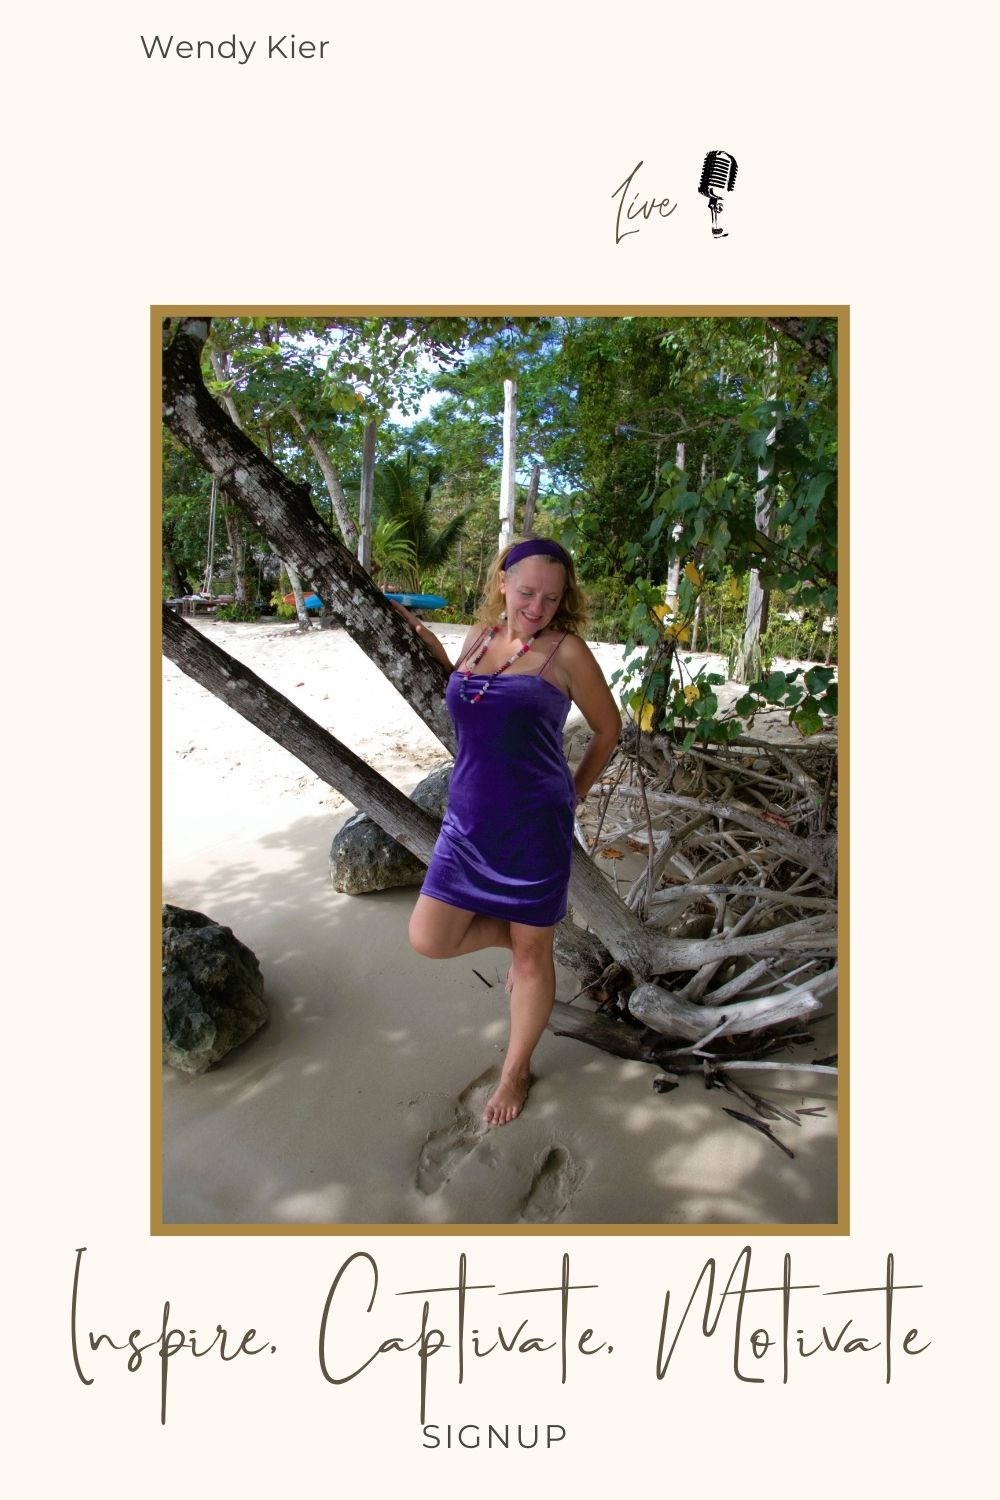 Wendy Kier Standing By A Tree on Beach